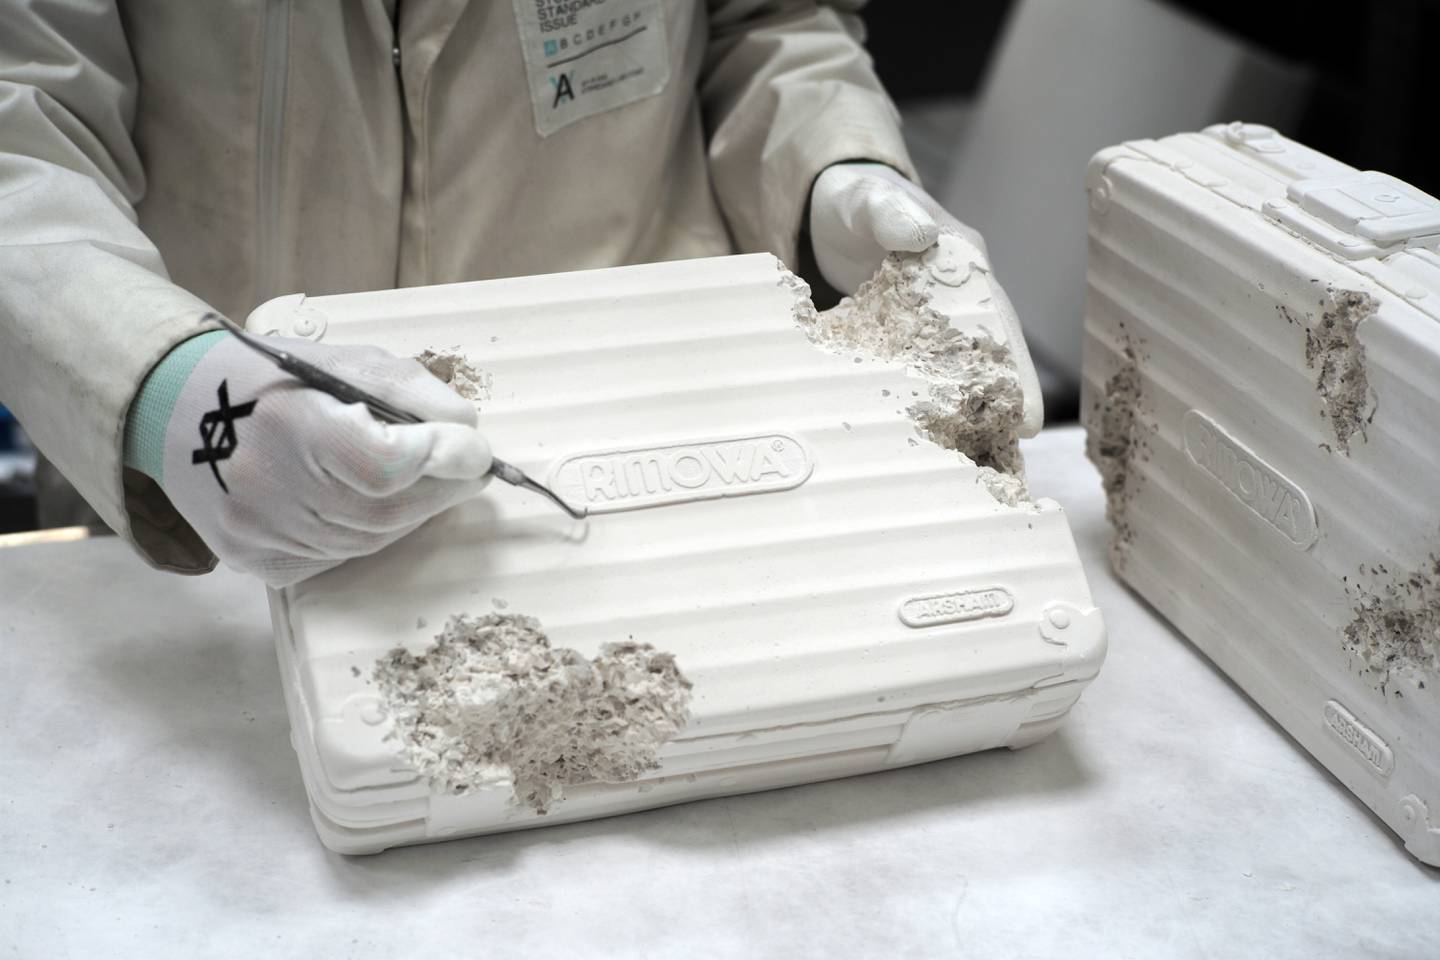 LVMH scion Alexandre Arnault commissioned Daniel Arsham to create Rimowa suitcases and Tiffany boxes in his signature style 